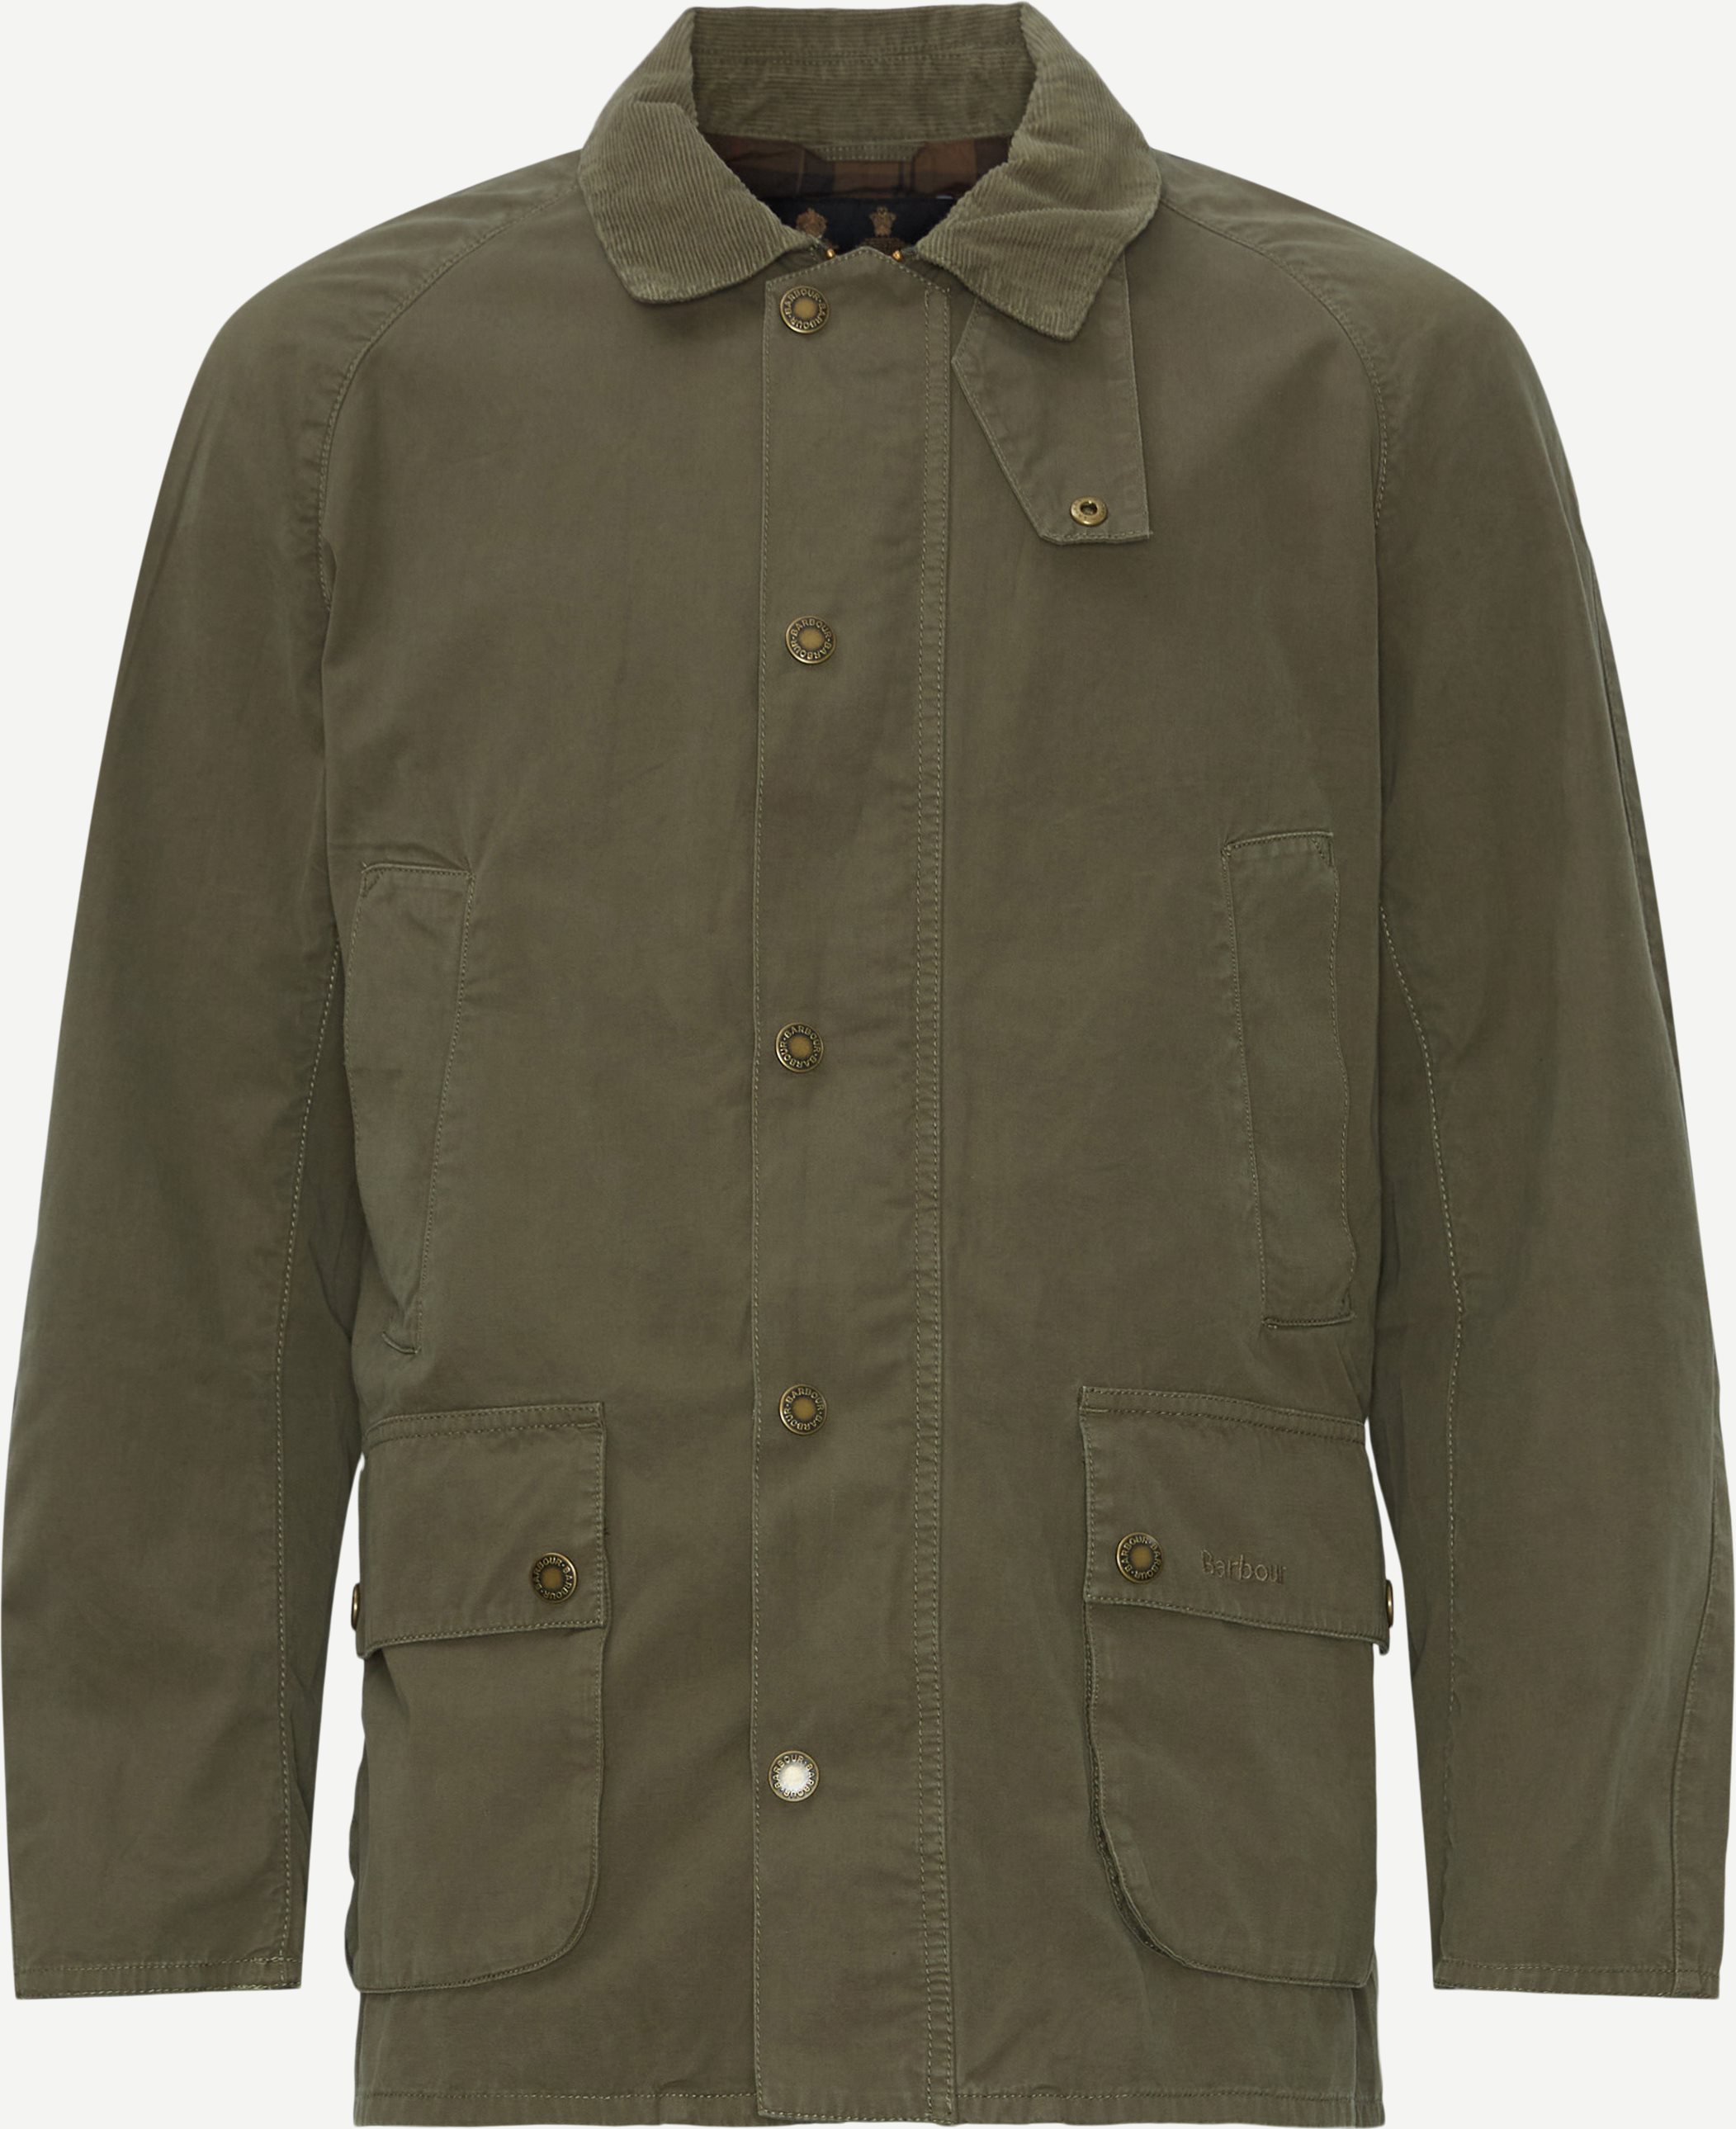 Barbour Jackets ASBY CASUAL MCA0792 Army